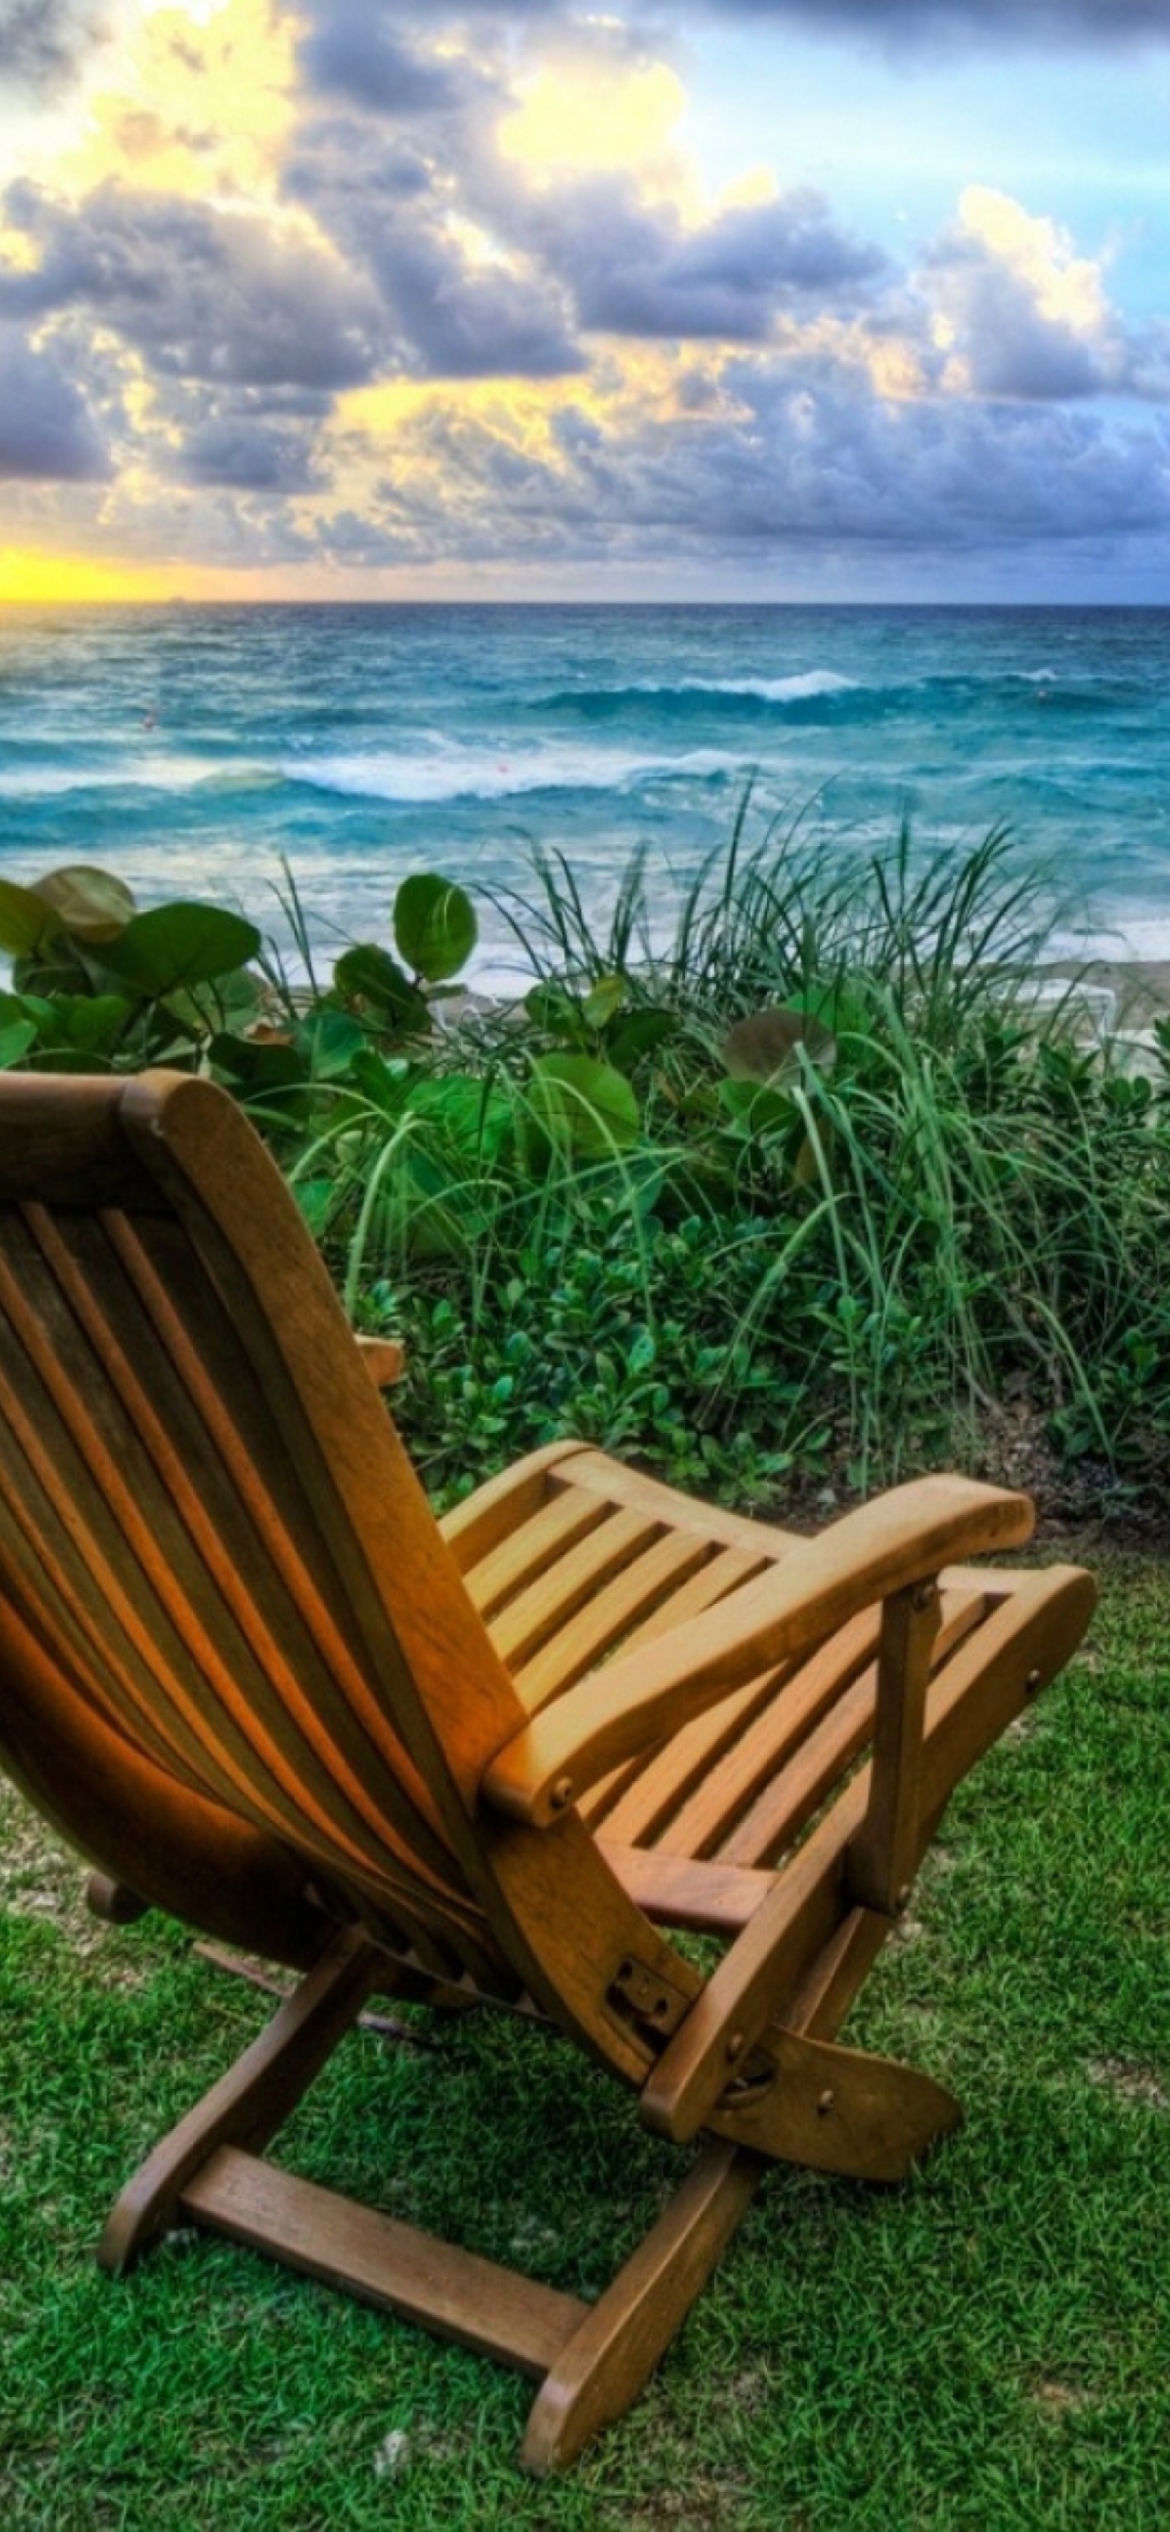 Chairs With Sea View wallpaper 1170x2532